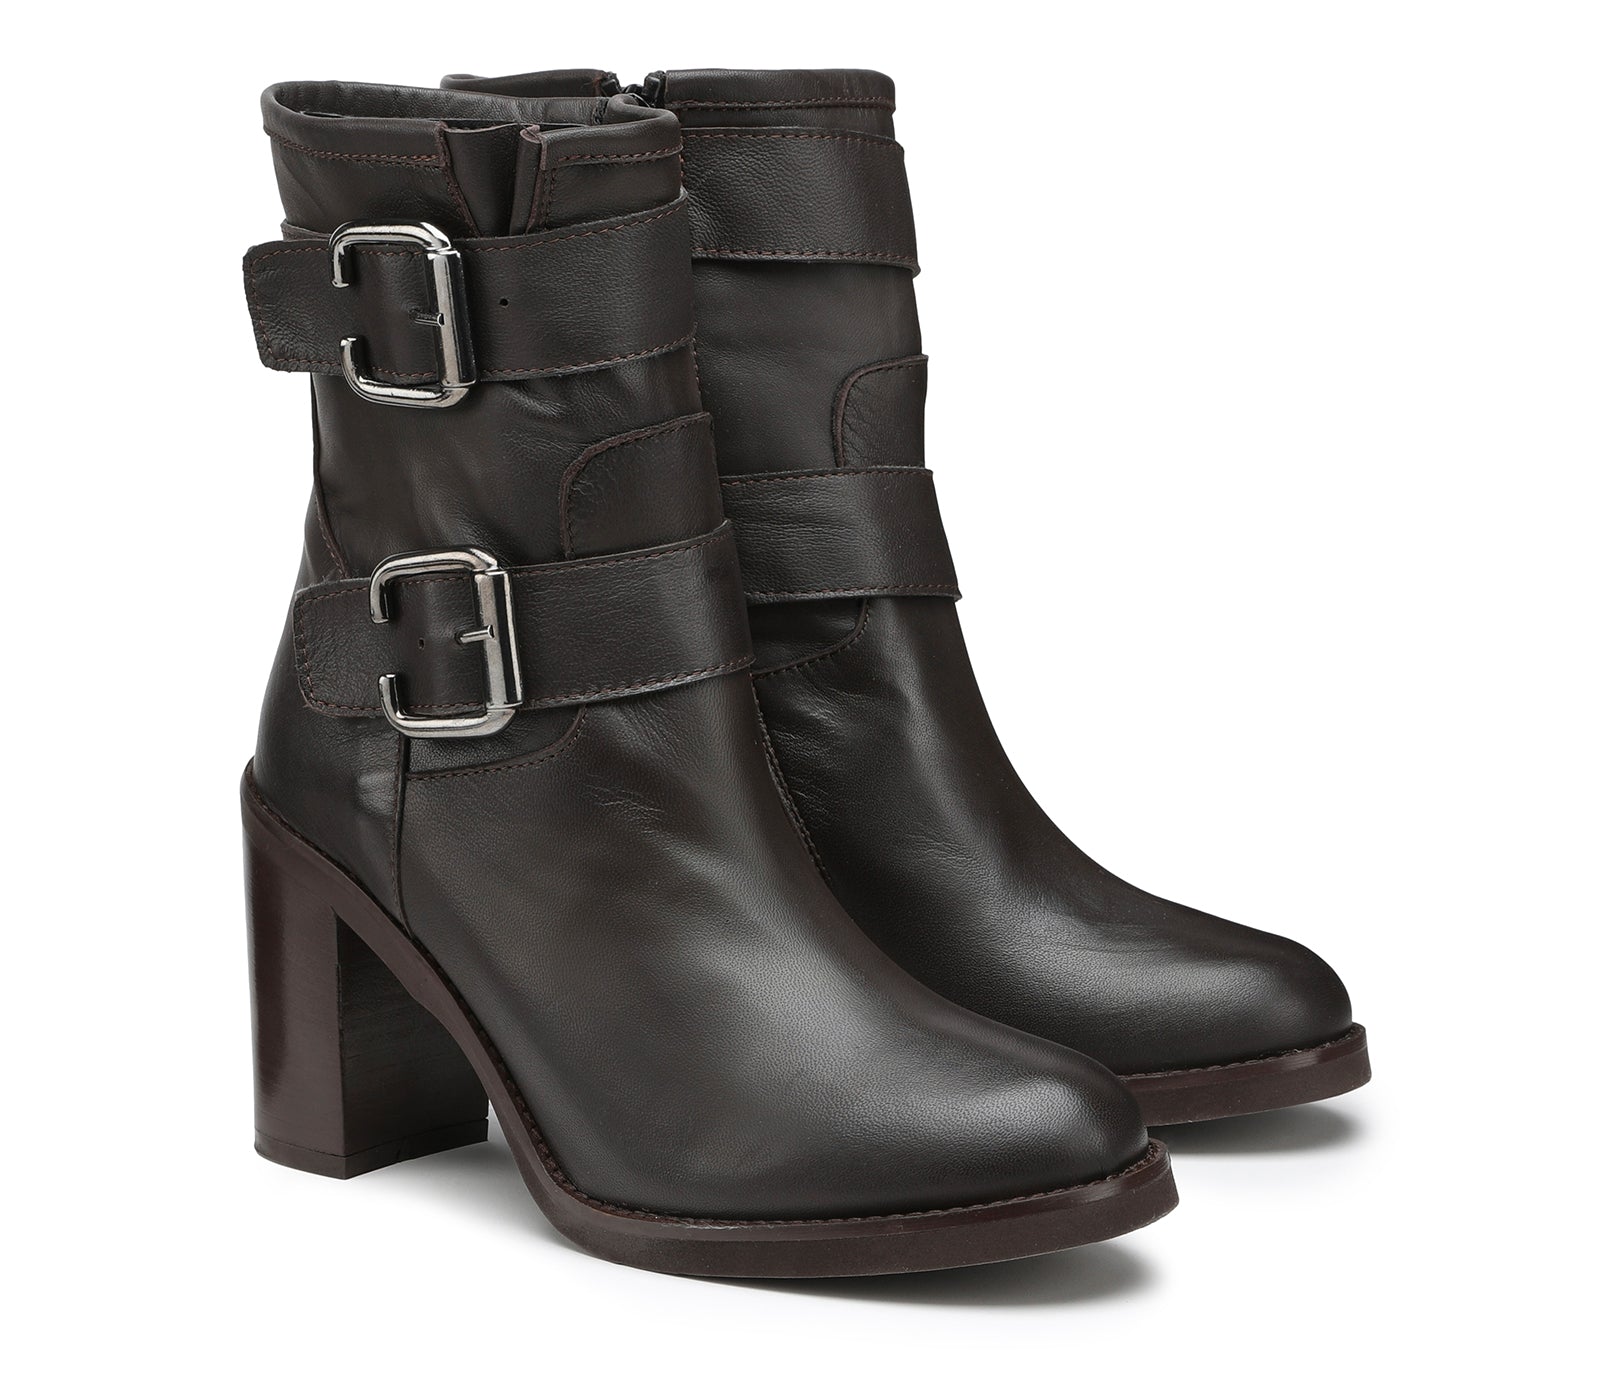 Black Women's Boots with Wide Heels and Adjustable Straps